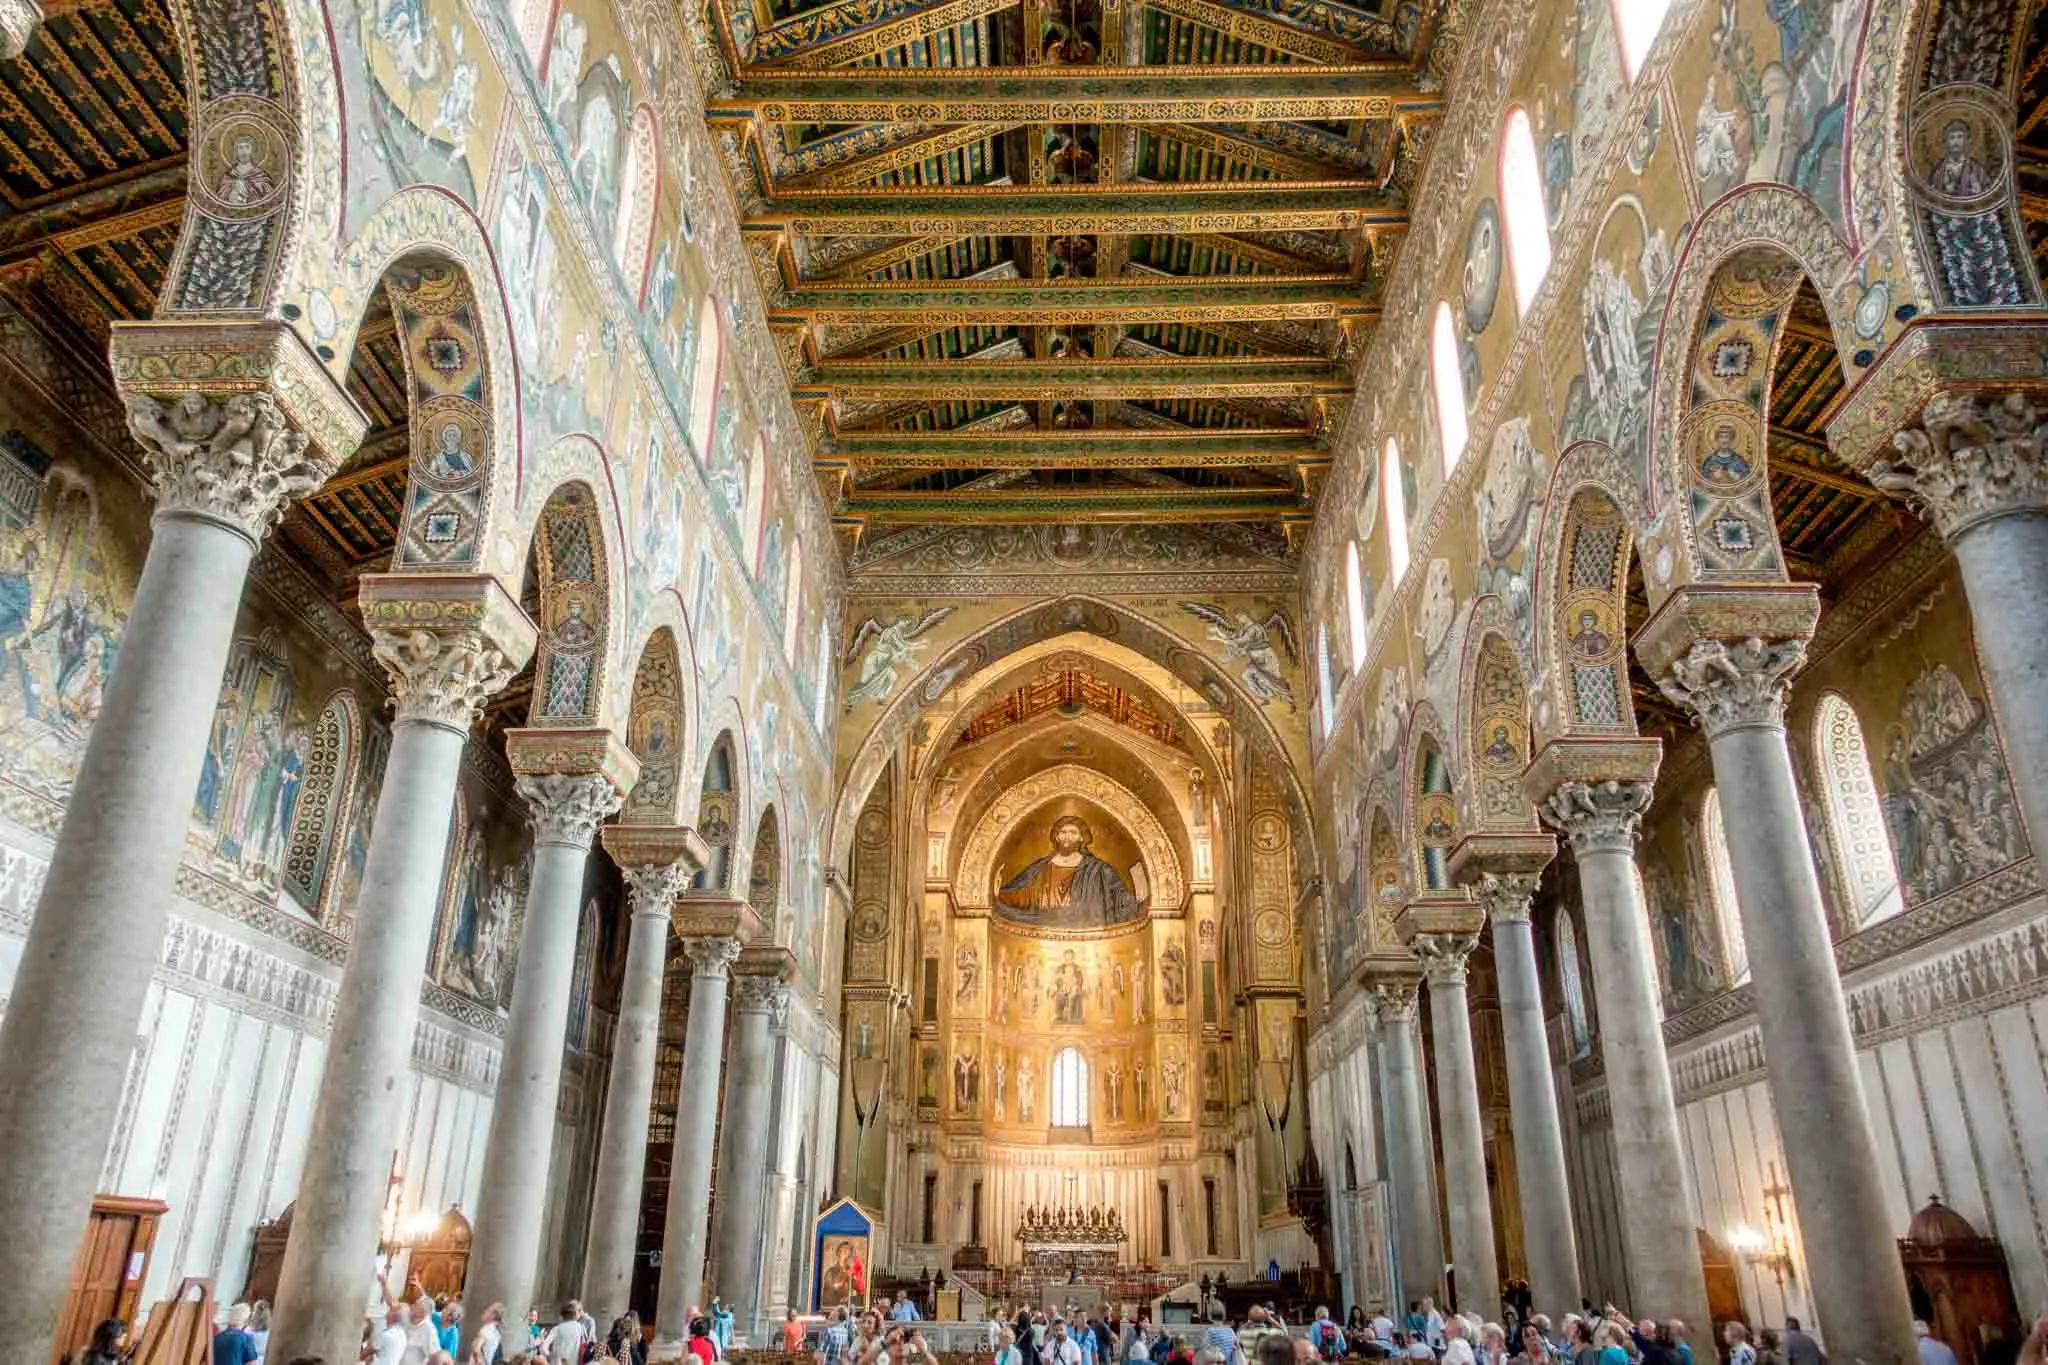 Interior of a cathedral decorated with gold mosaics.